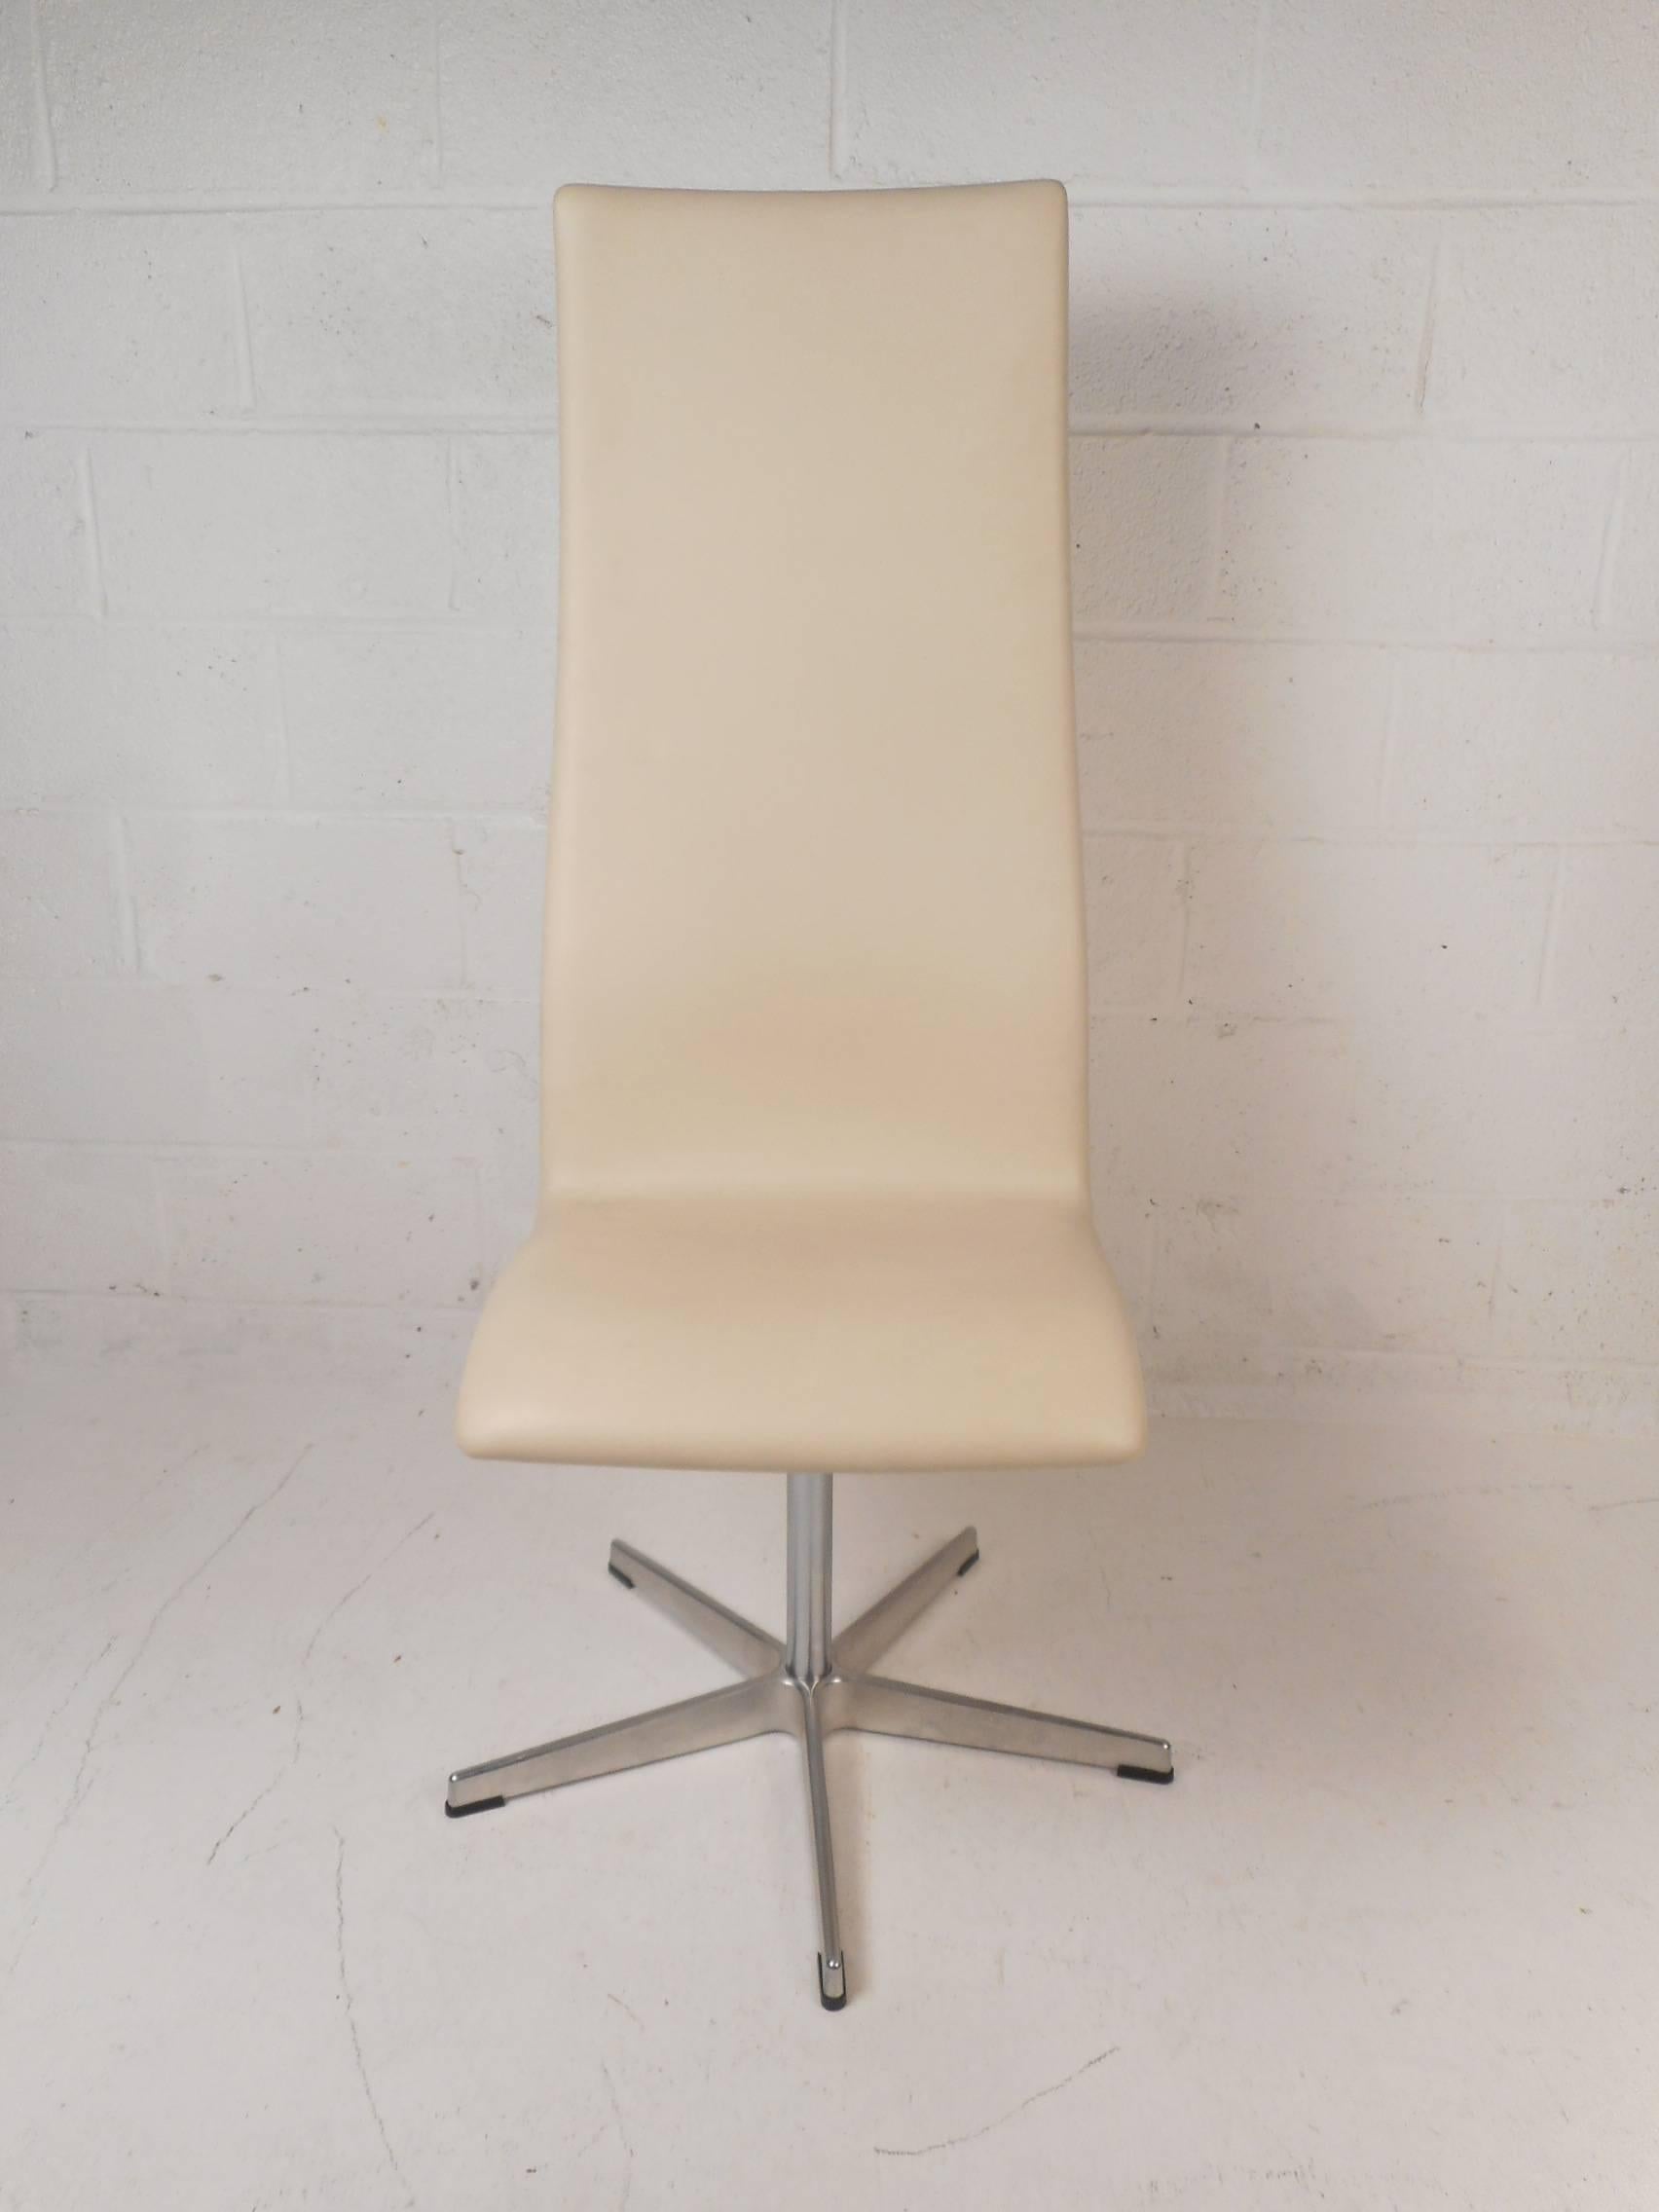 This stunning high back slipper chair was originally designed for professors at St. Catherines College in Oxford. A sleek design with a high curvy backrest ensuring maximum comfort. This stylish chair swivels making it perfect as a comfortable desk